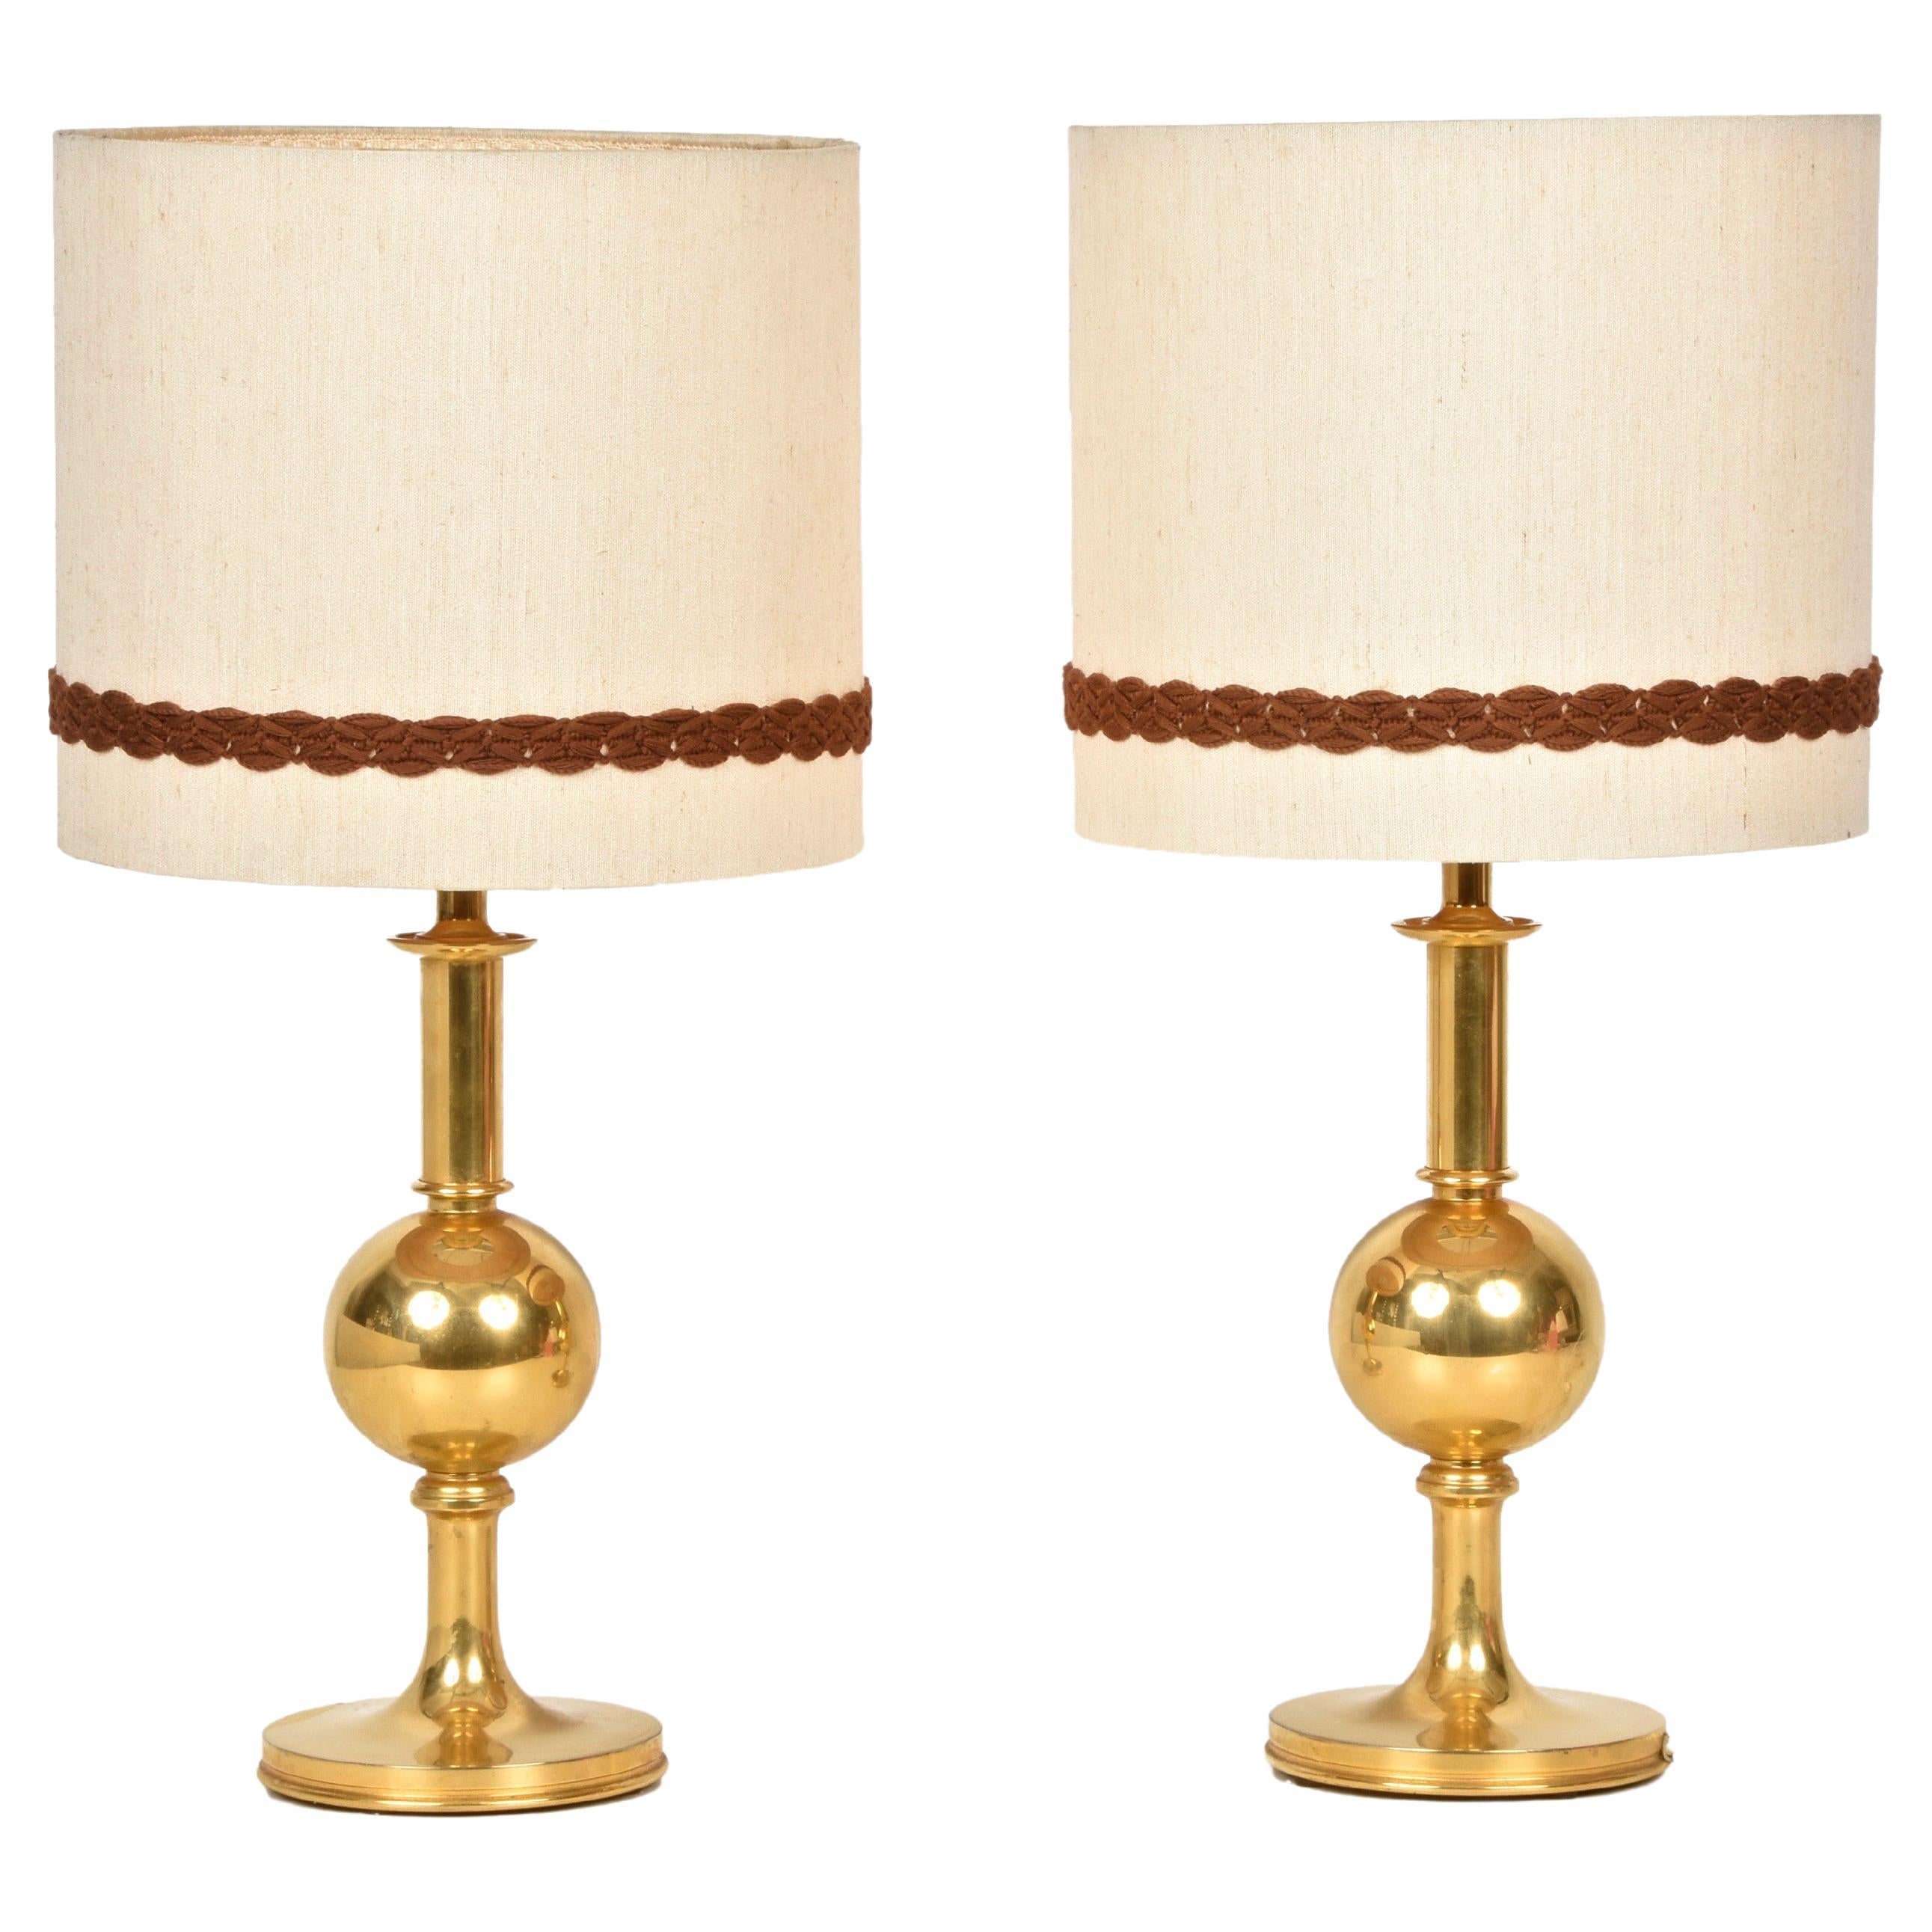 Pair of Midcentury Italian Solid Gilt Brass Table Lamps, 1980s